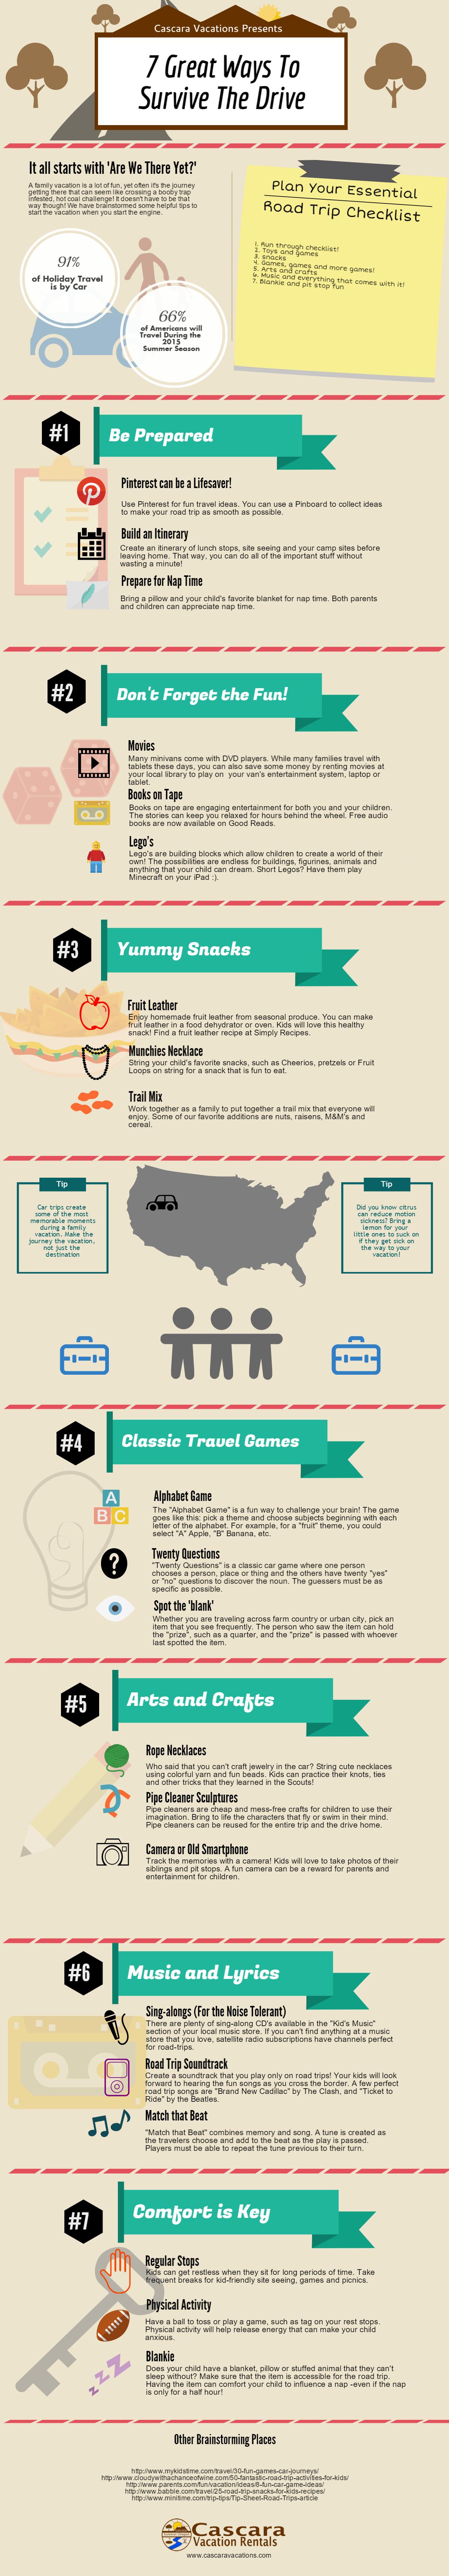 Family Road Trip Infographic